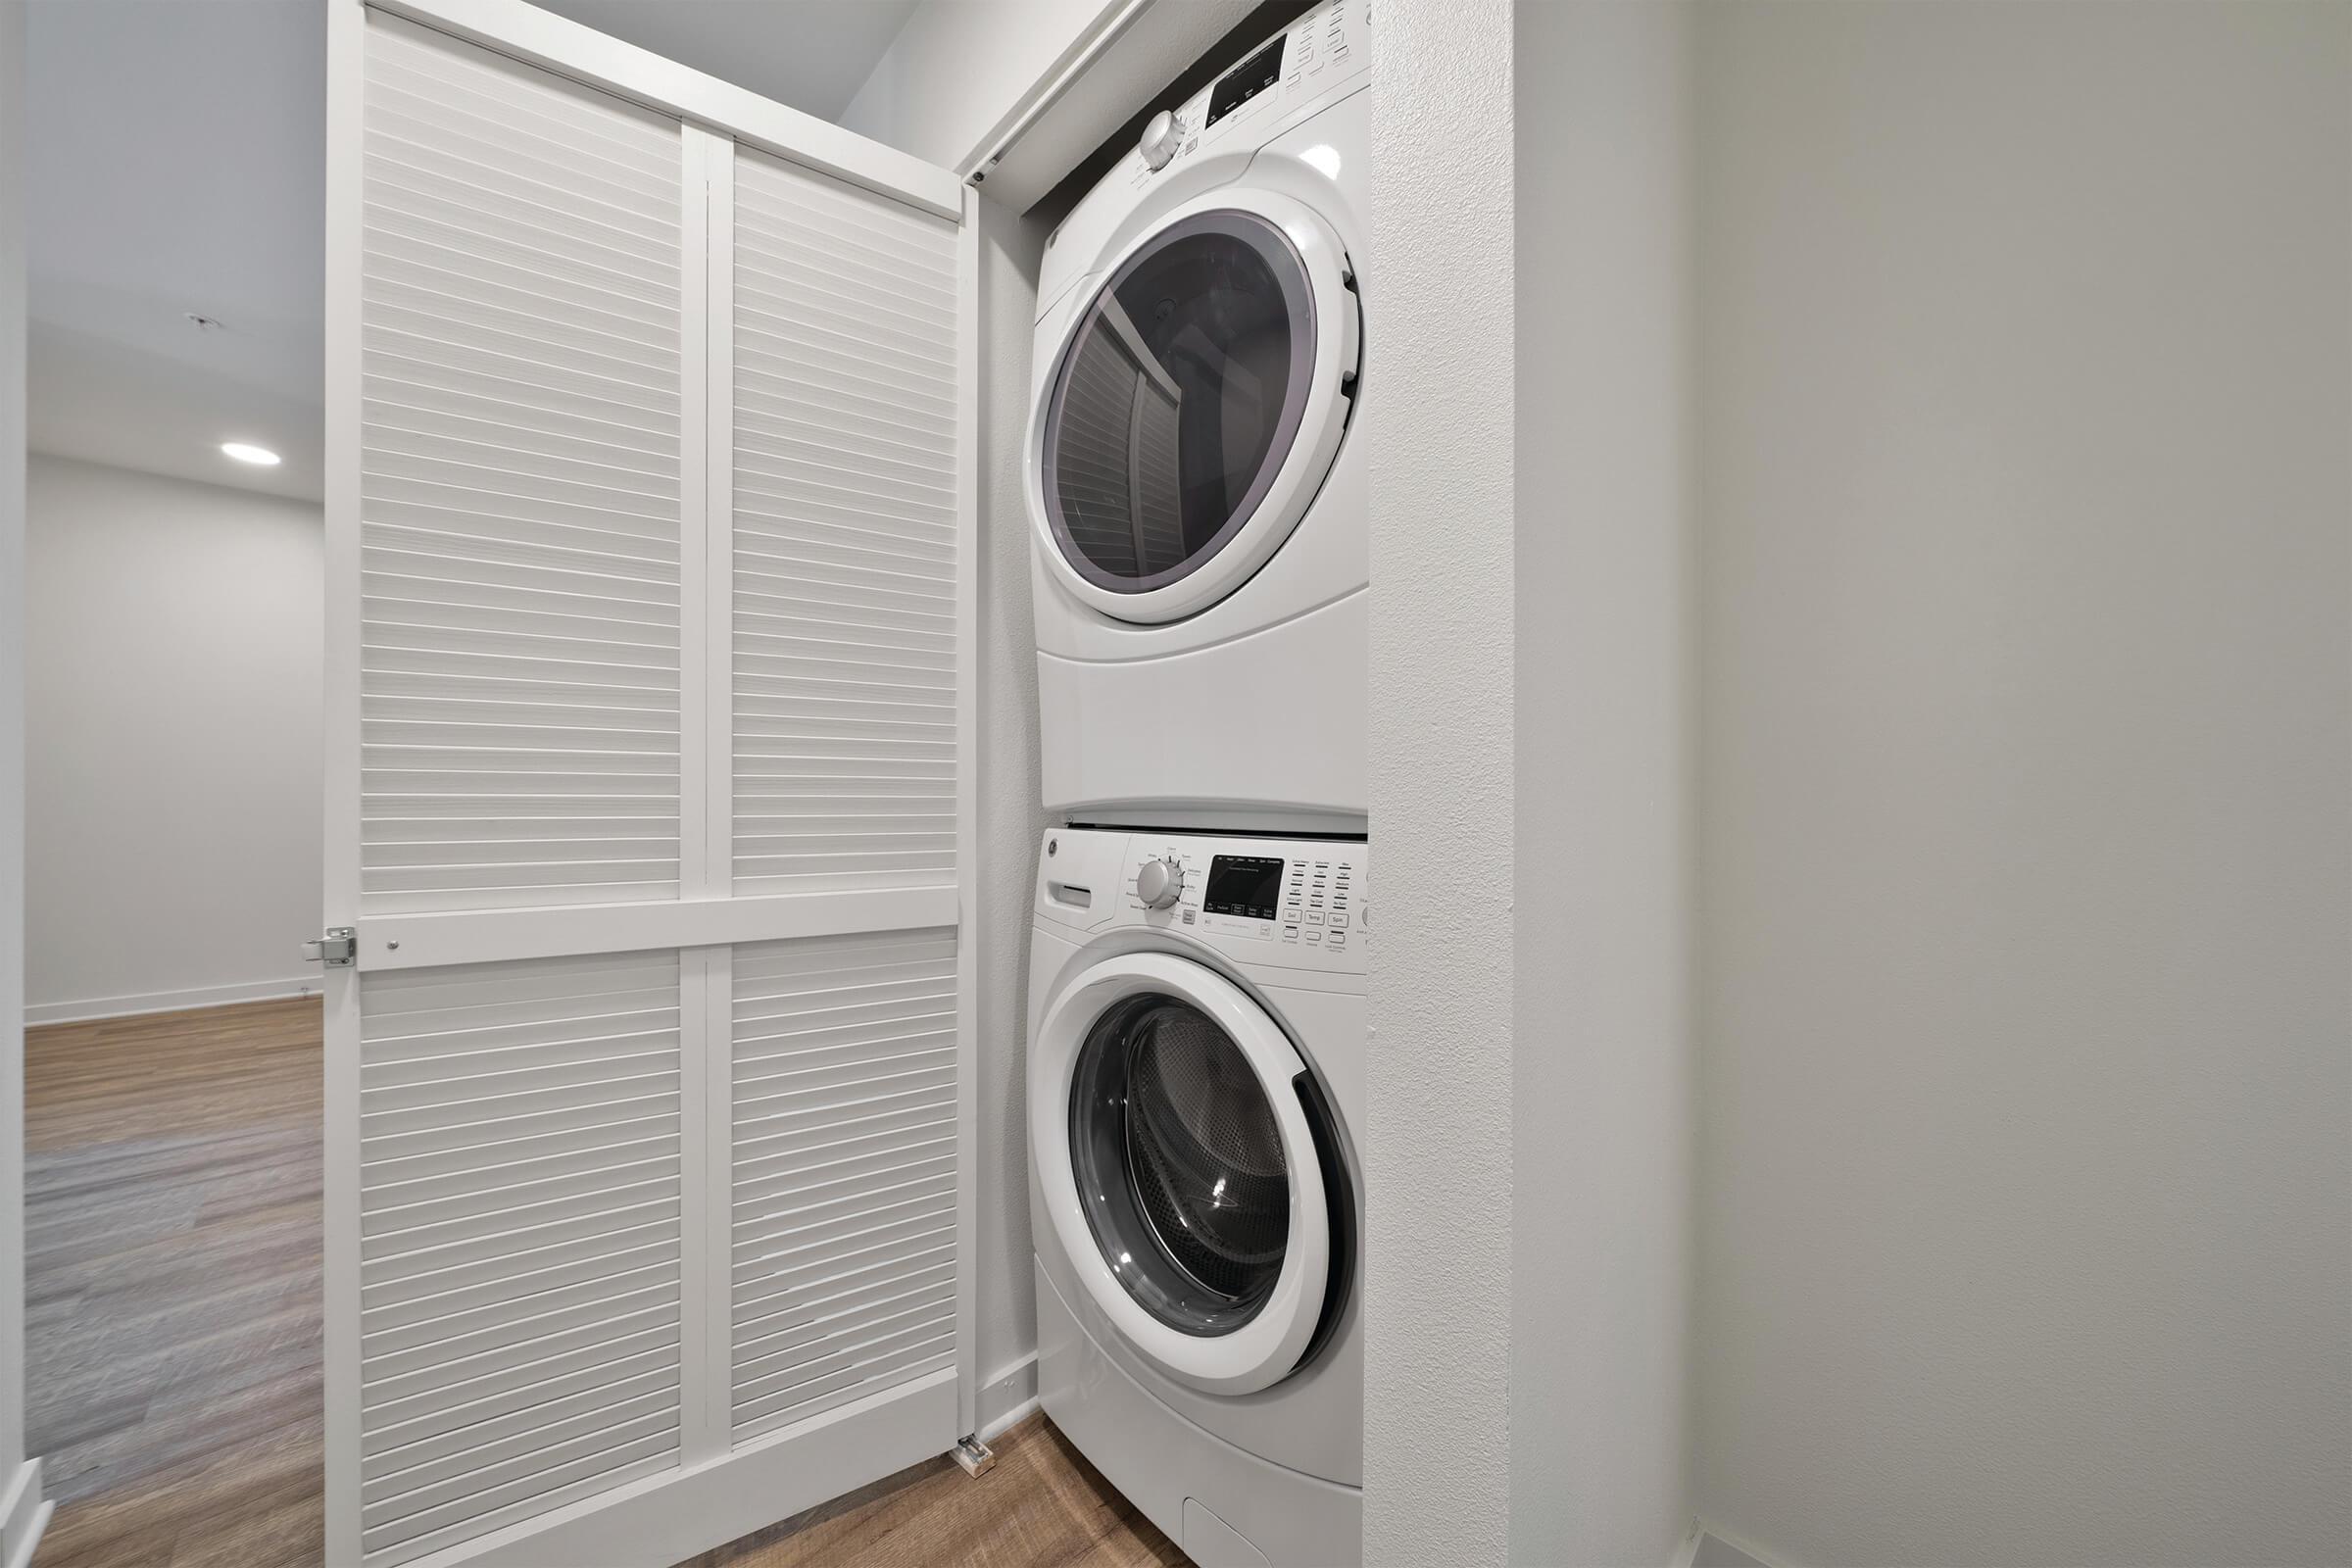 Laundry won't be a worry with our full-size front-loading washer and dryer